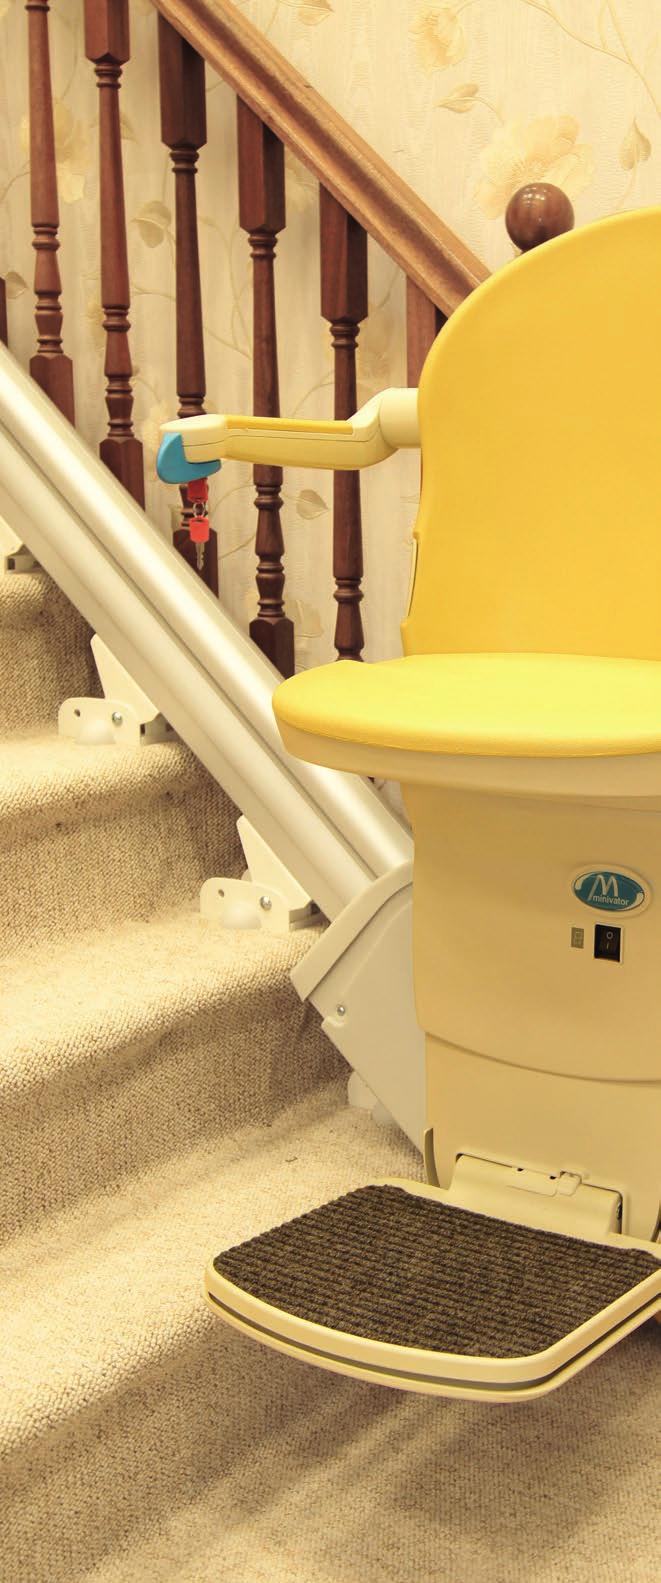 Handicare 1000 For those looking for minimal track intrusion into the staircase, the Handicare 1000 offers one of the slimmest straight